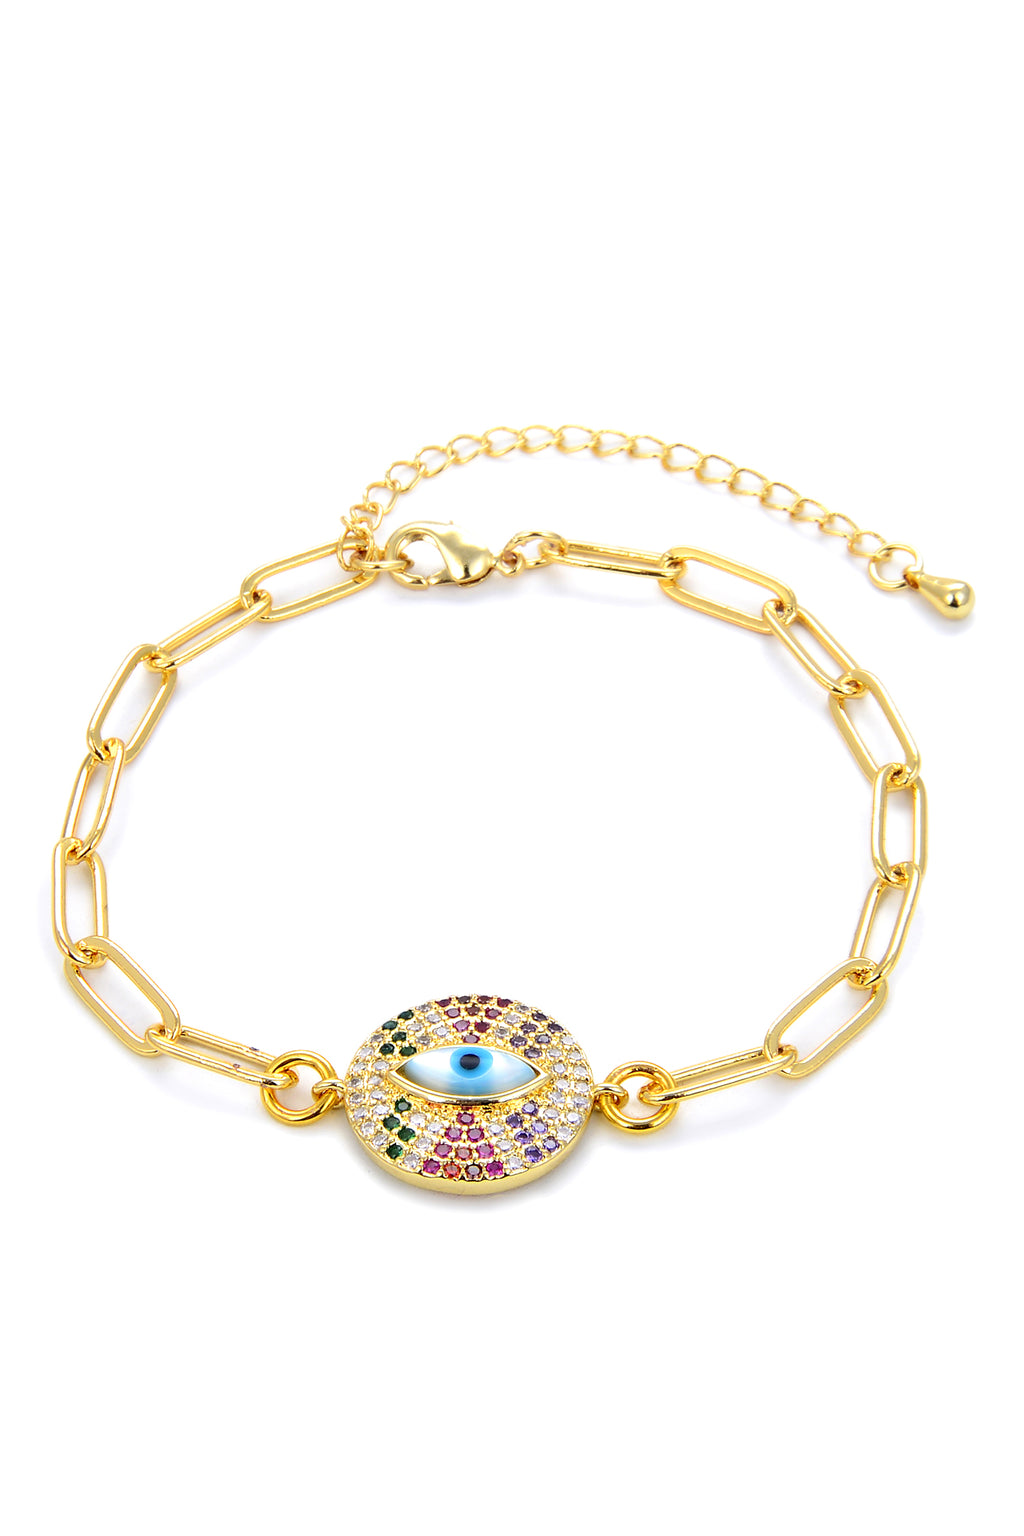 Gold chain link bracelet with shiny cubic zirconia studded circle charm with centered evil eye motif.